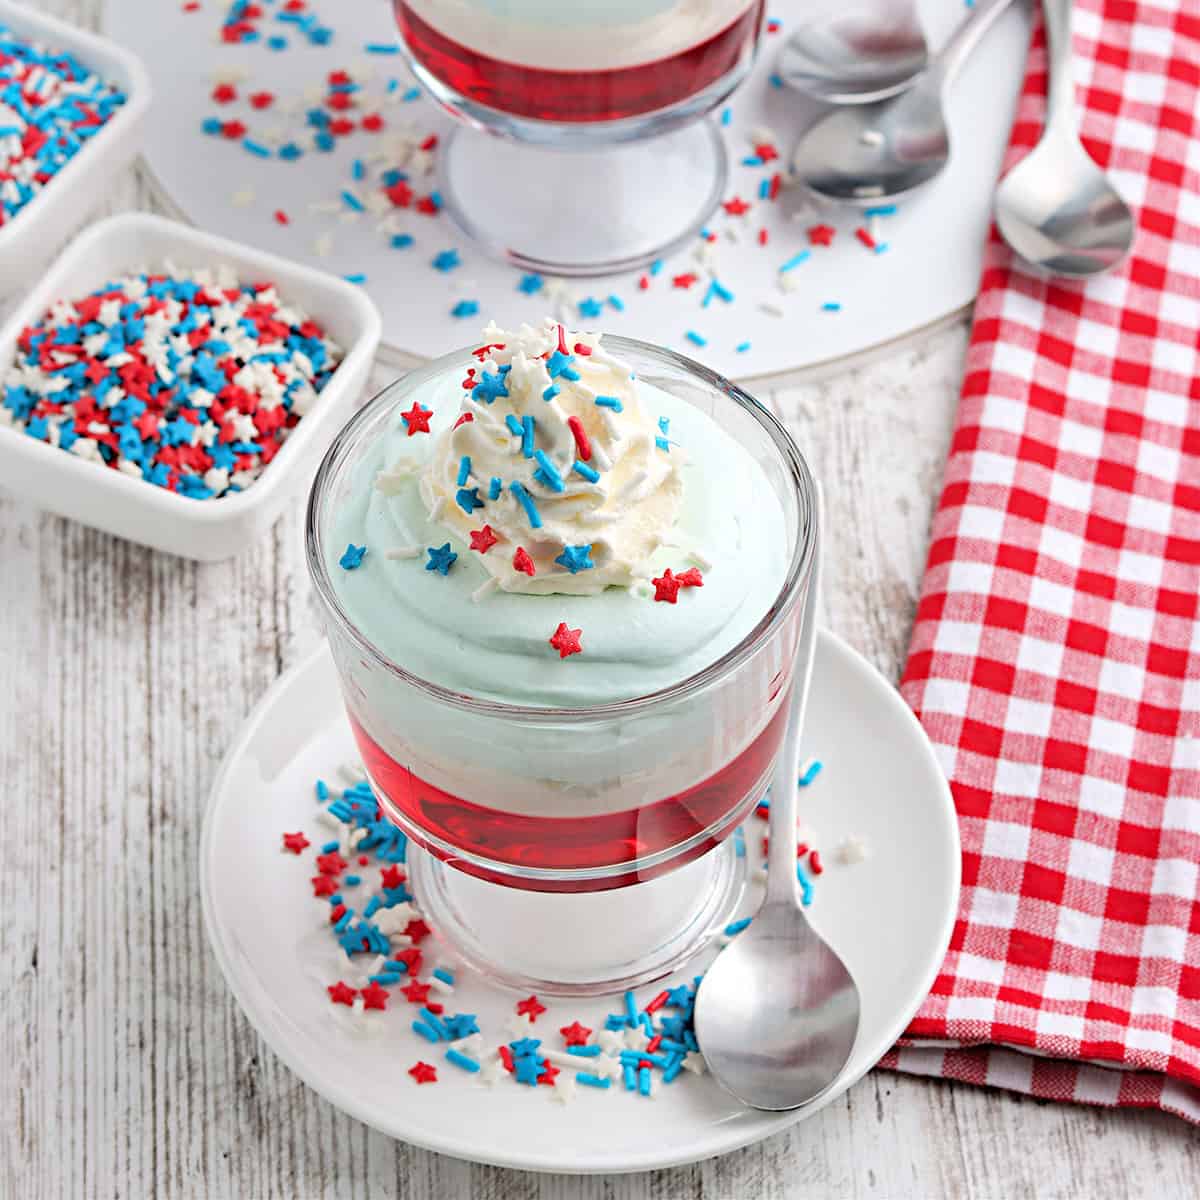 Finished red, white, and blue jello parfaits with sprinkles.